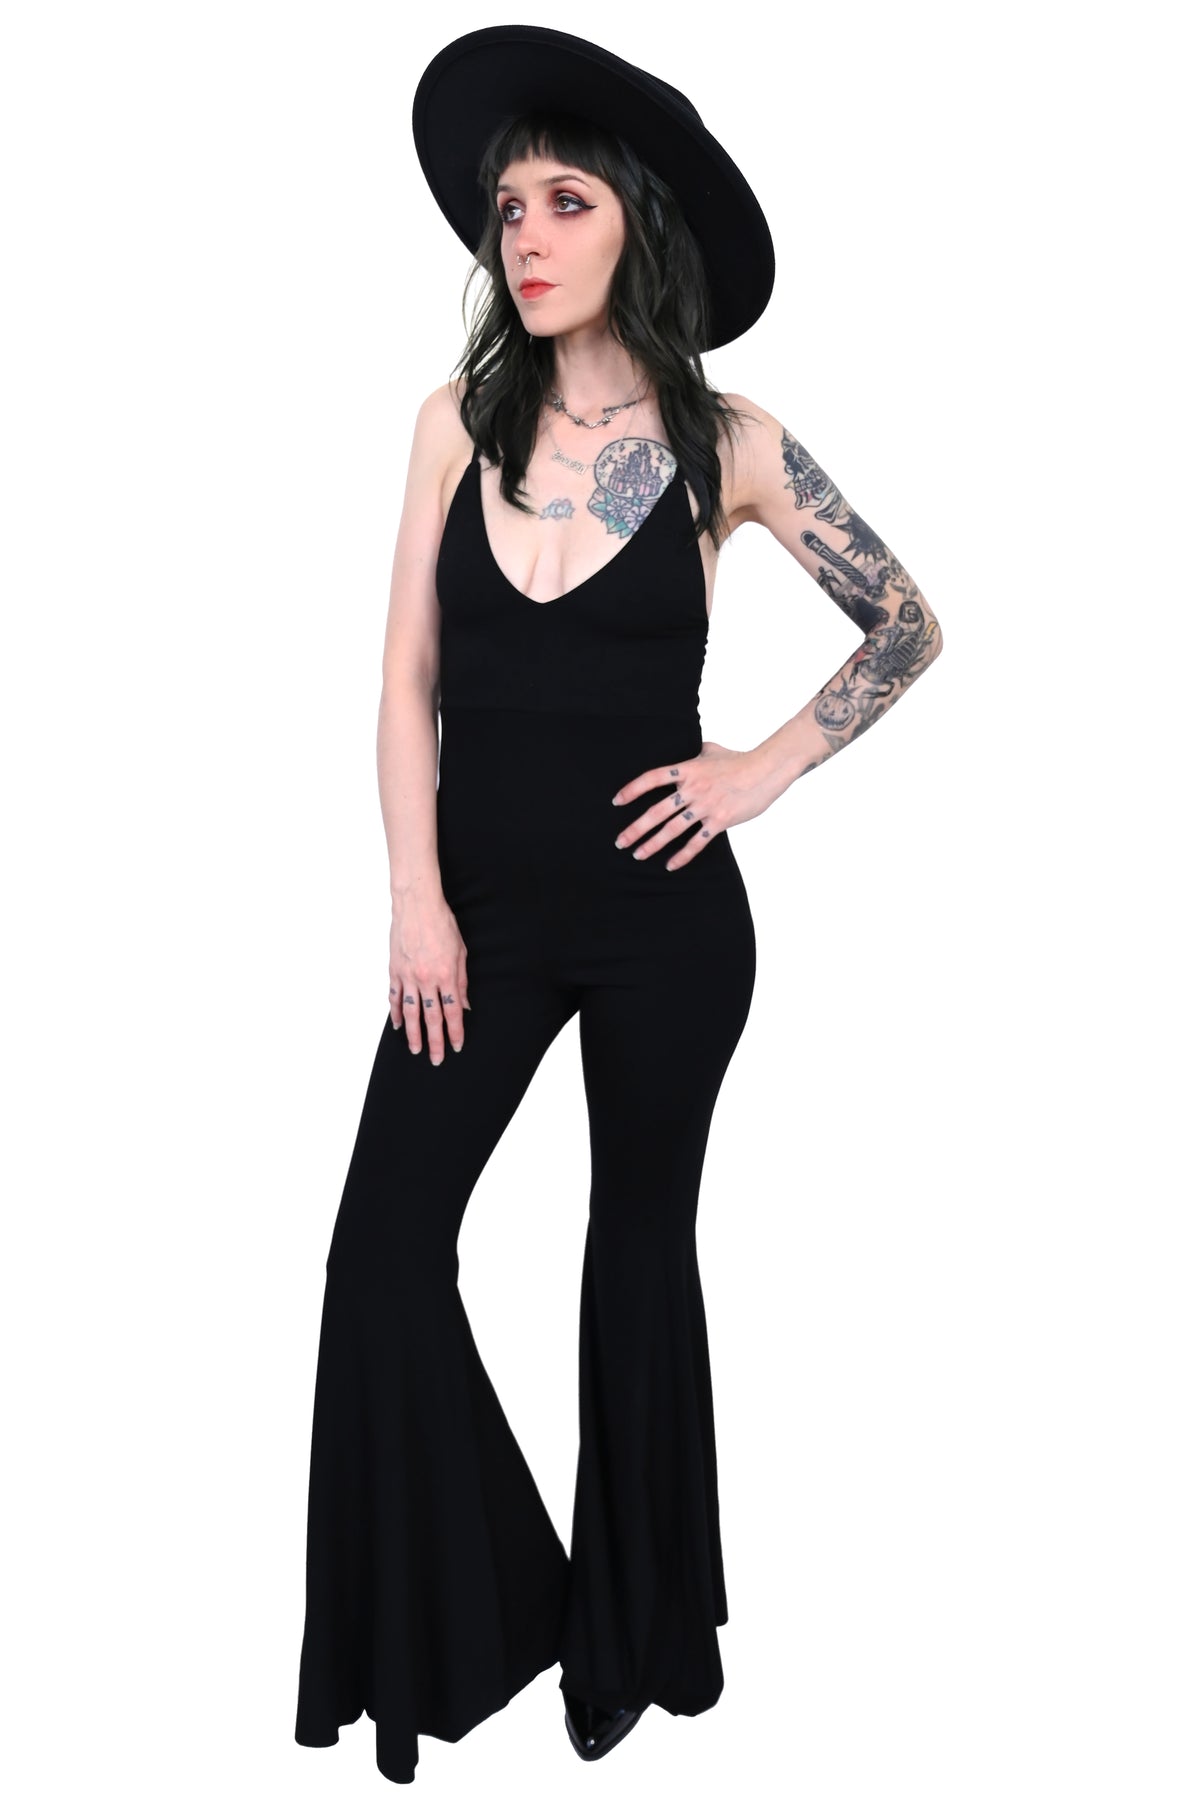 This jumpsuit has a deep plunging neckline and the ultimate flared bell bottoms with adjustable straps